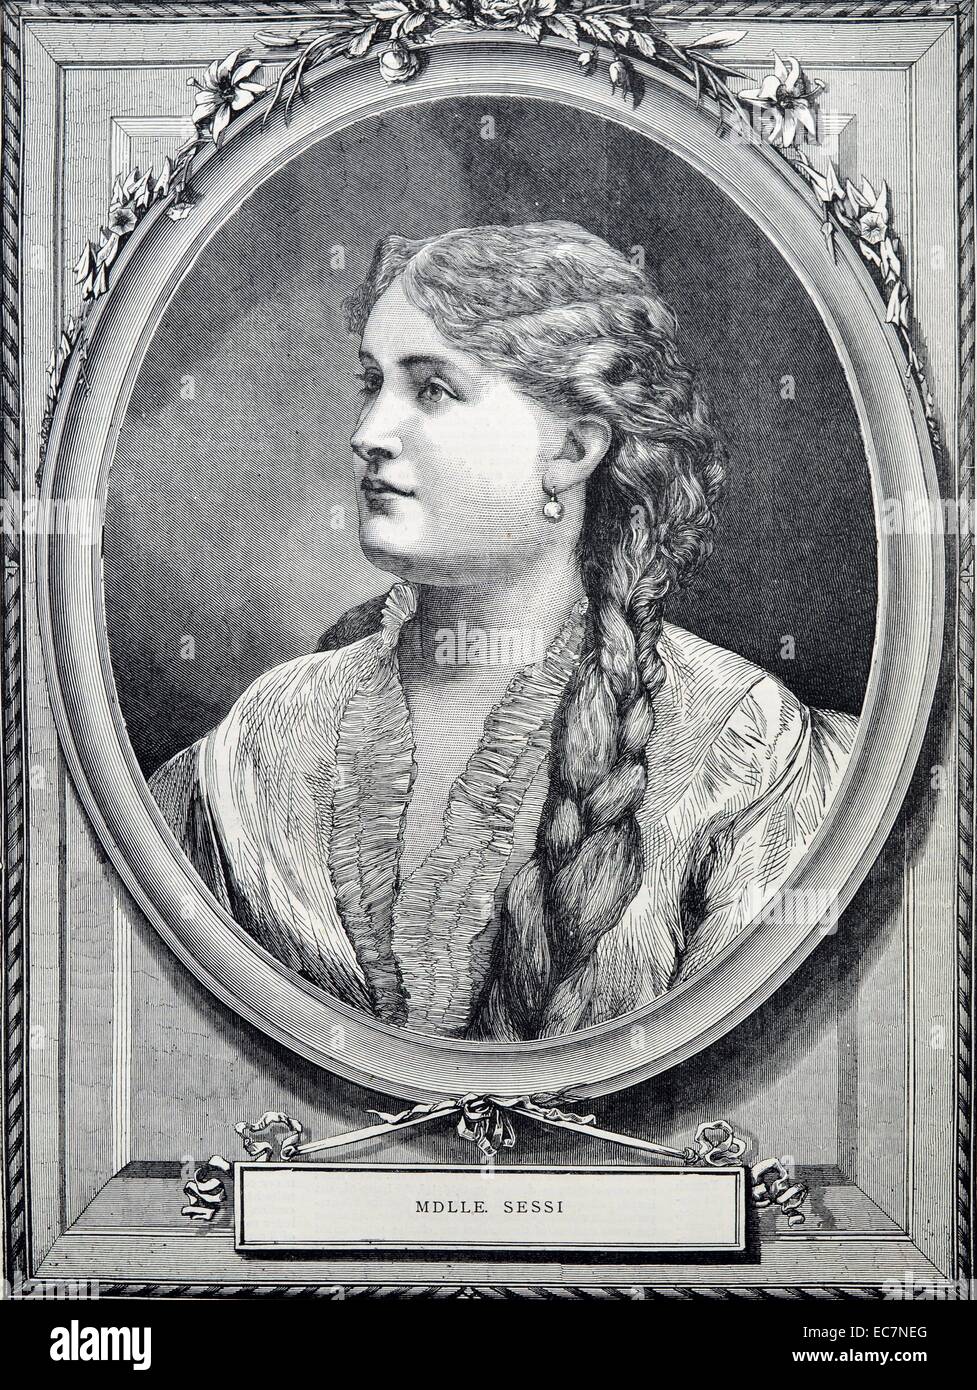 Engraving of Mathilde Sessi a French Opera singer active during the 19th Century. Dated 1870 Stock Photo